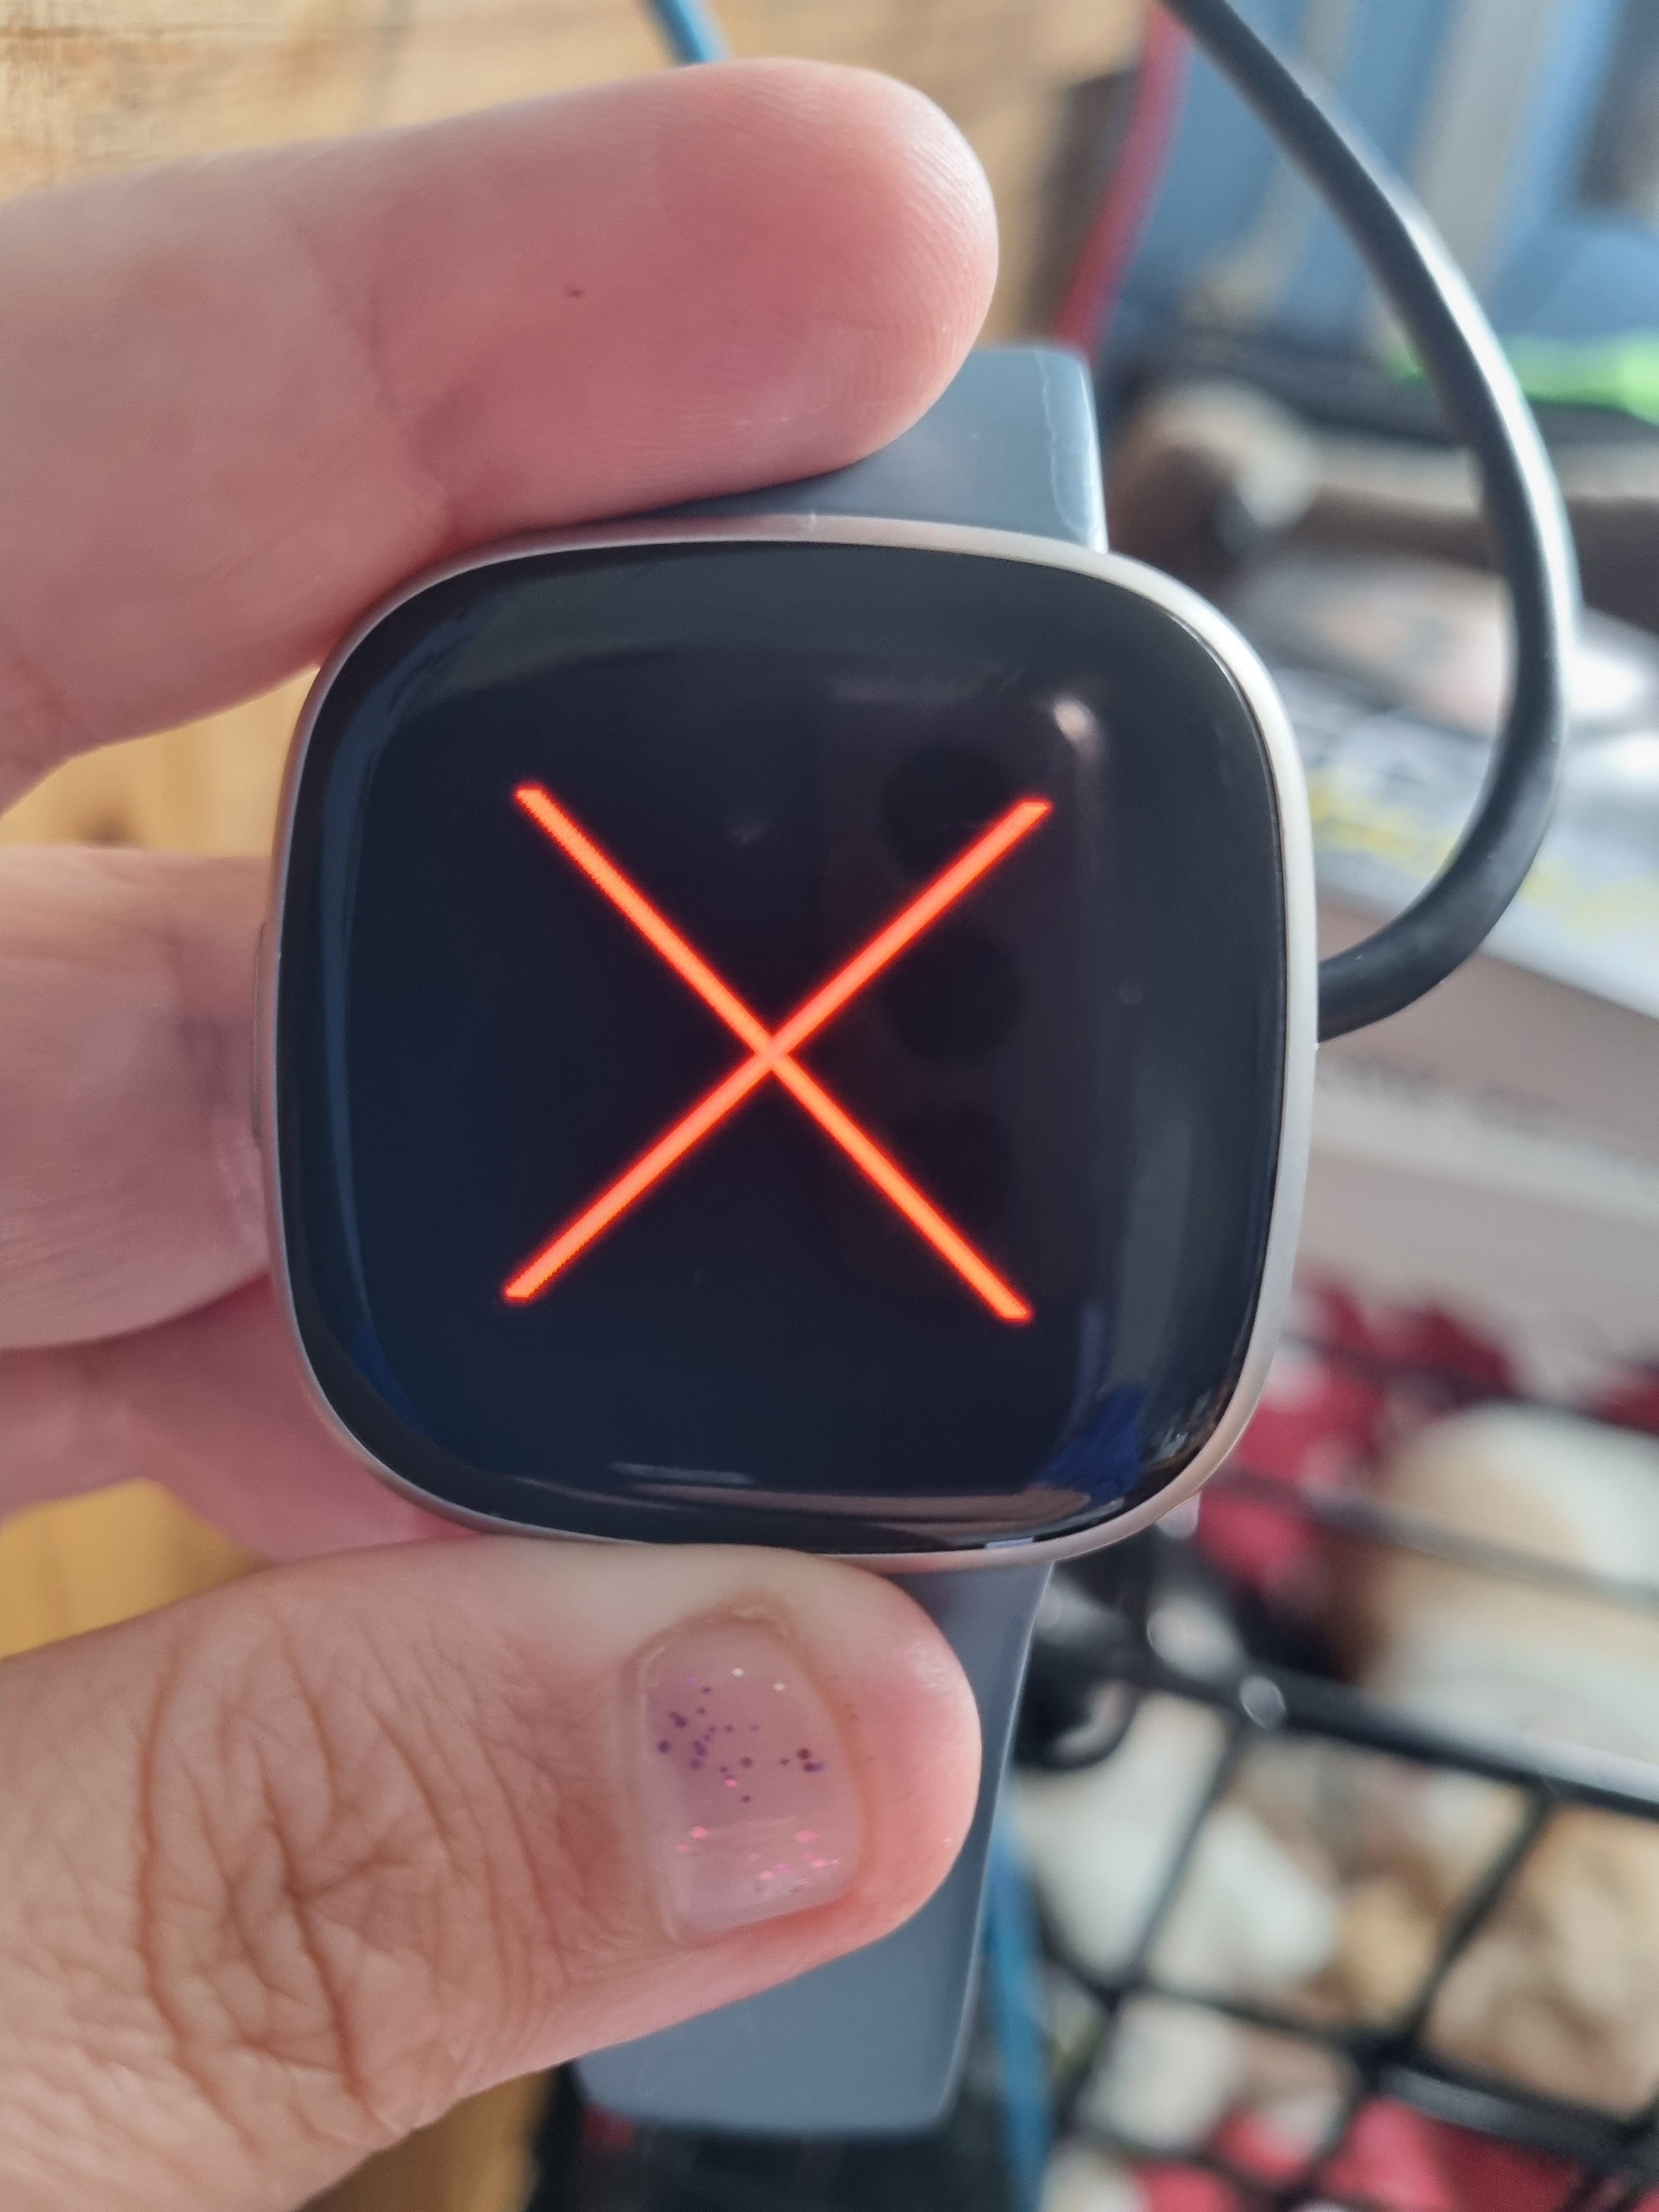 How to Use Fitbit Versa 4 for Beginners 